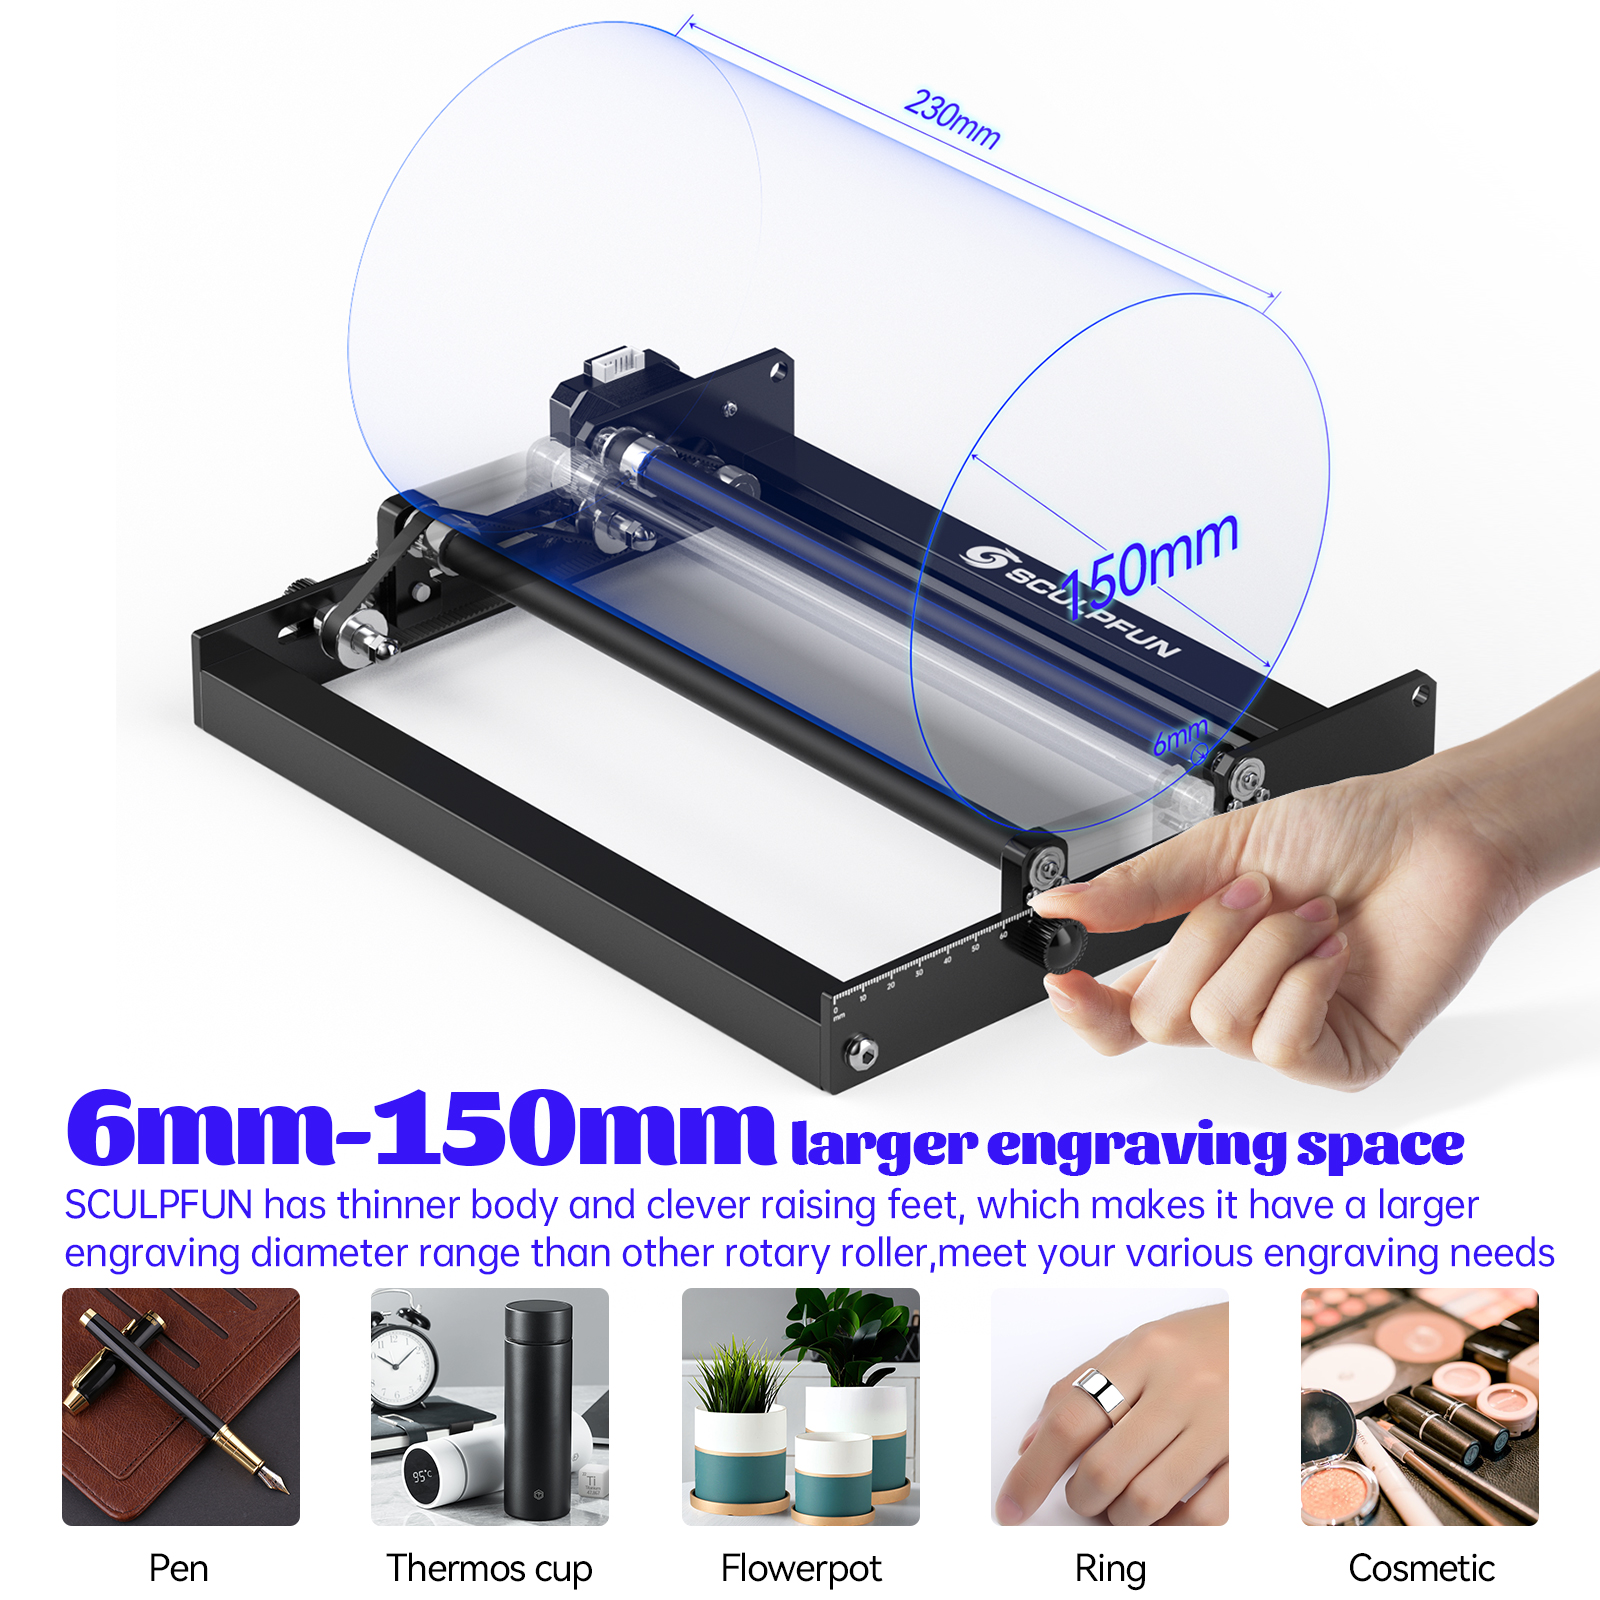 SCULPFUN-Laser-Rotary-Roller-for-S9-Laser-Engraver-Y-axis-Roller-360-degree-Rotating-for-6-150mm-Eng-1934417-2